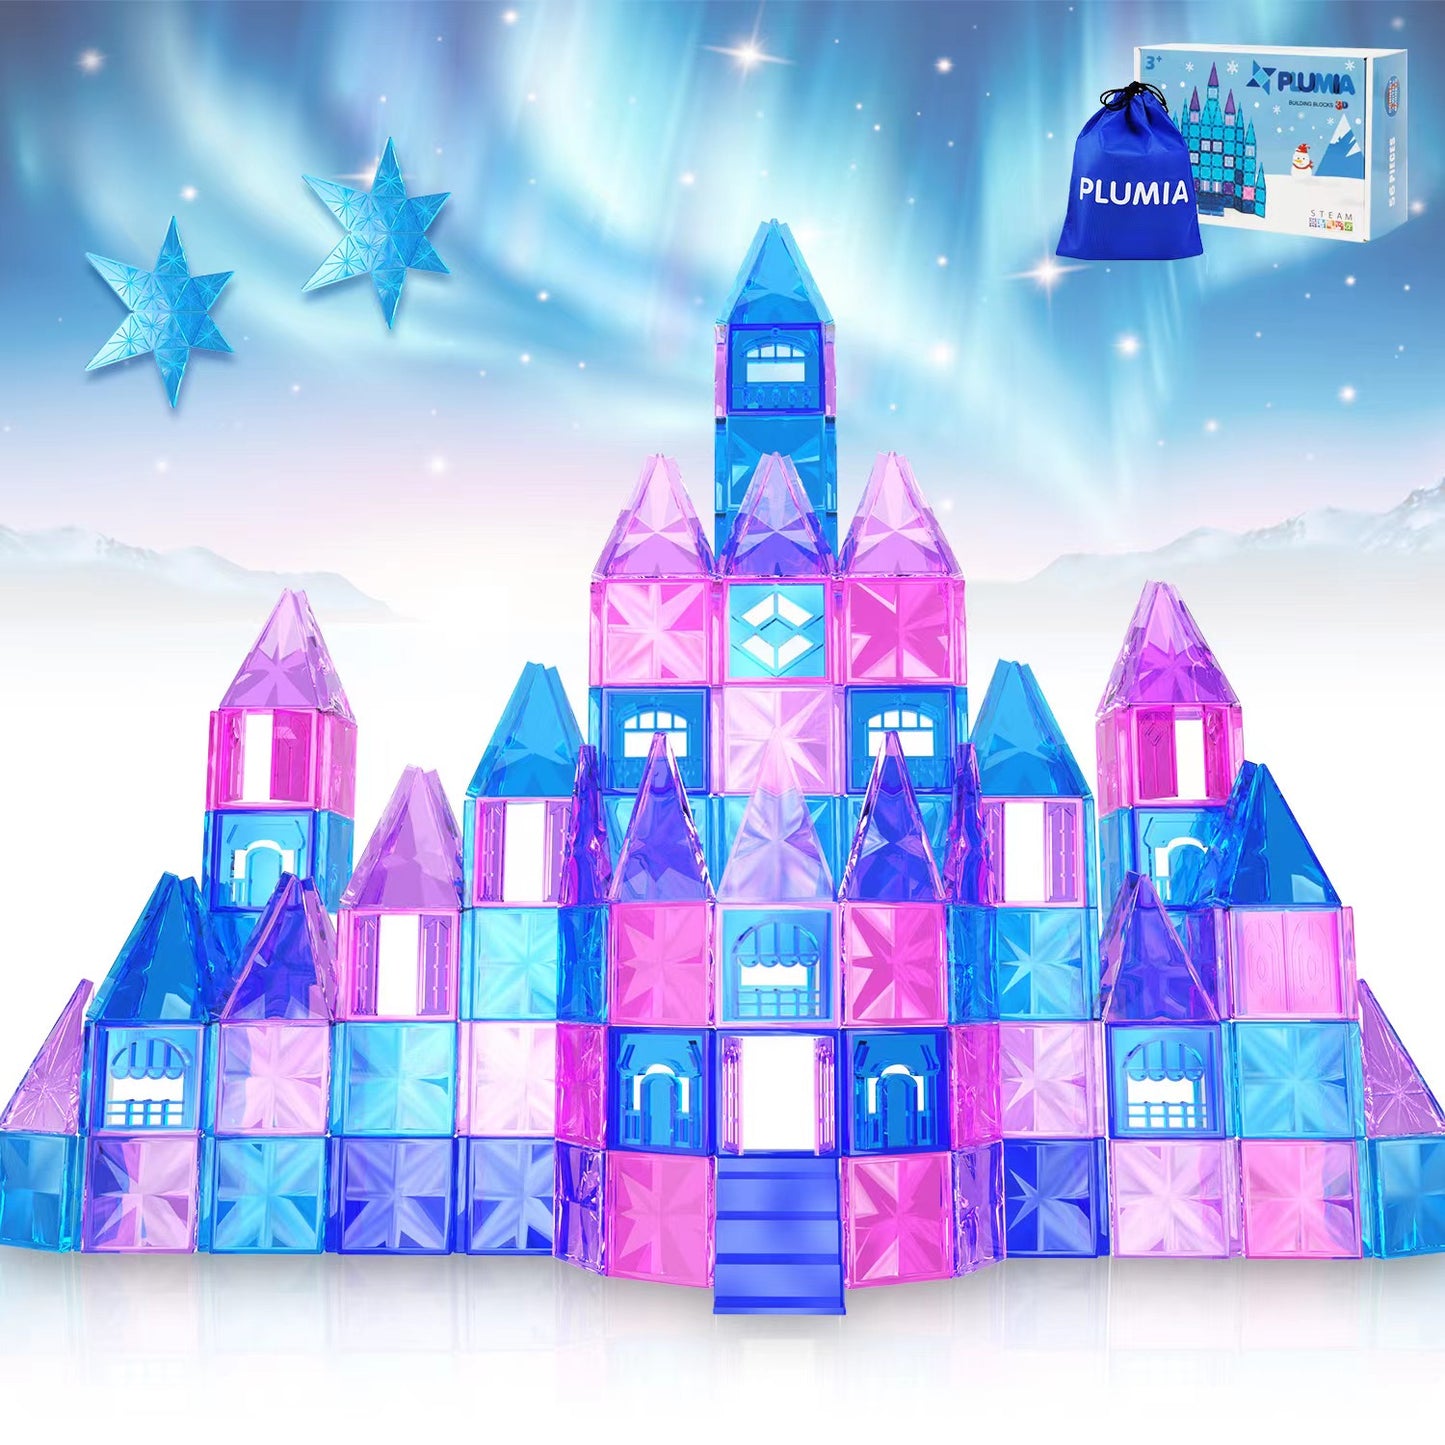 Magnetic Tiles Kids Toys Diamond Magnetic Blocks Toys for Girls Birthday Gifts Building Toys for 3 4 5 6 7 8+ Year Old Girl and Boys Blue Purple Pink Blocks Castle Princess Toys